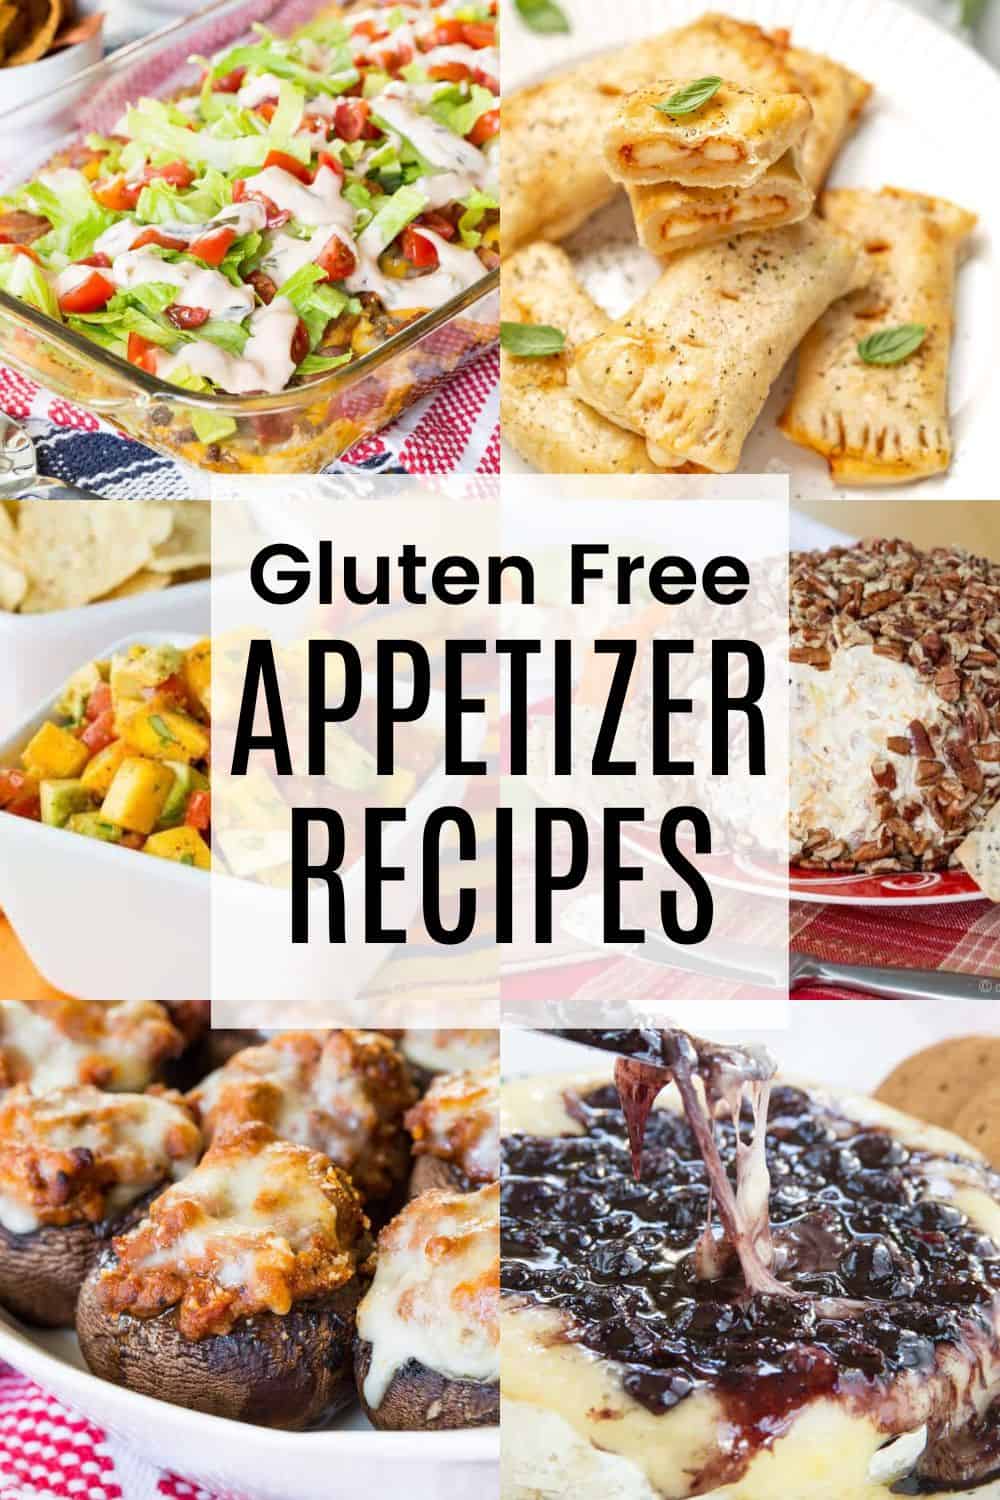 A two by three collage of appetizers like stuffed mushrooms, pizza rolls, a cheese ball, and more, with a transparent white box in the middle with text overlay that says "Gluten Free Appetizer Recipes".